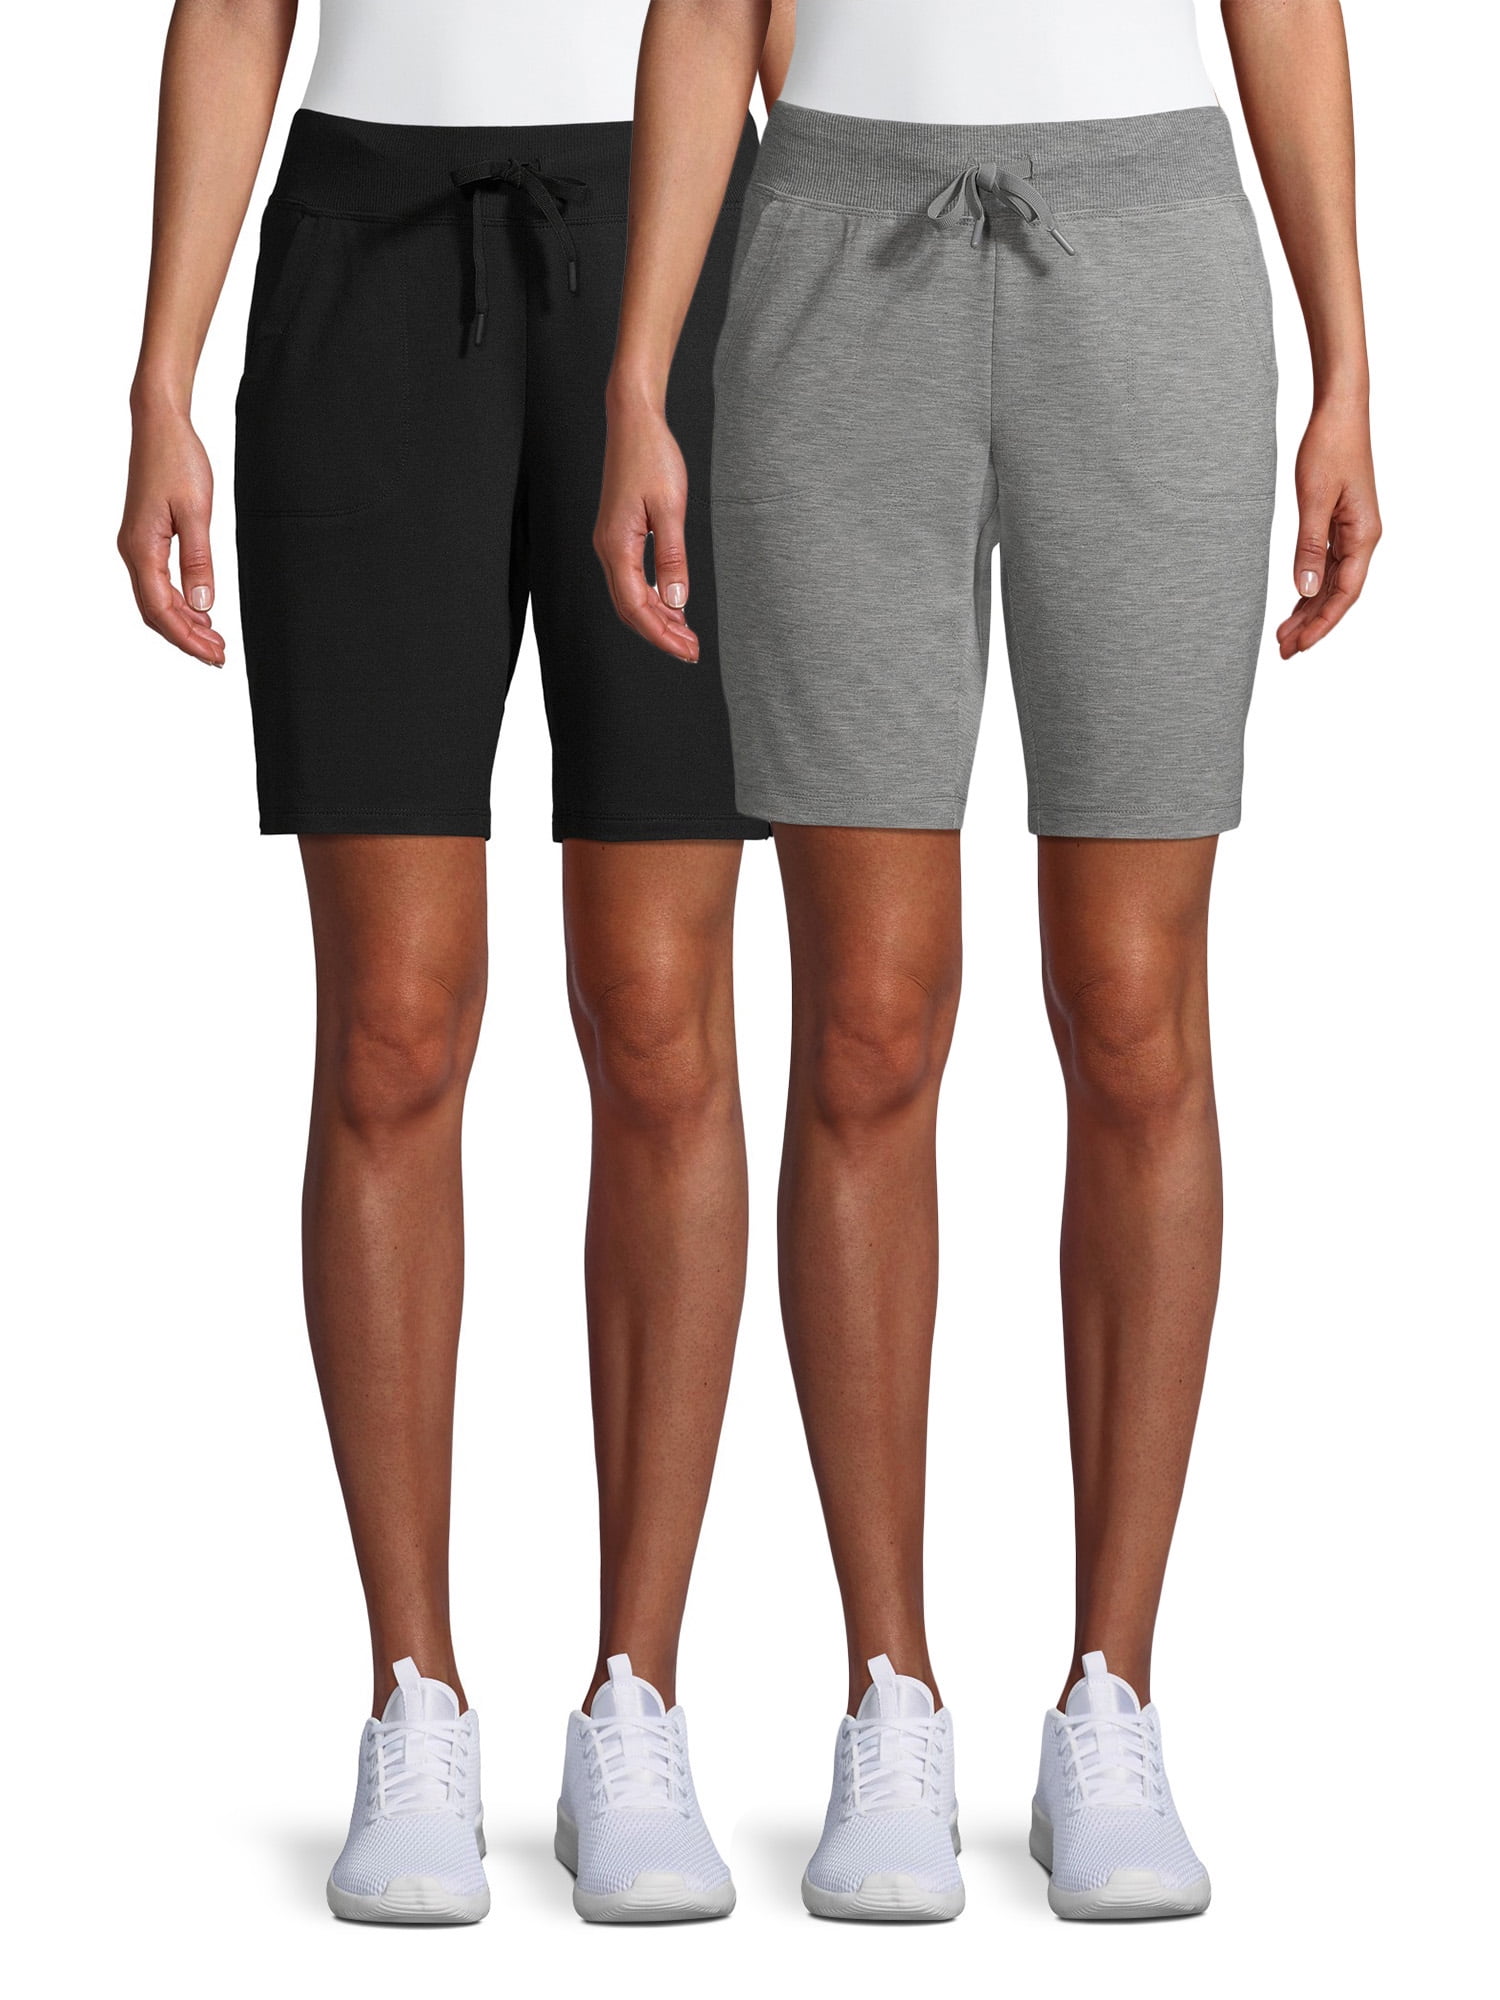 athletic shorts brands